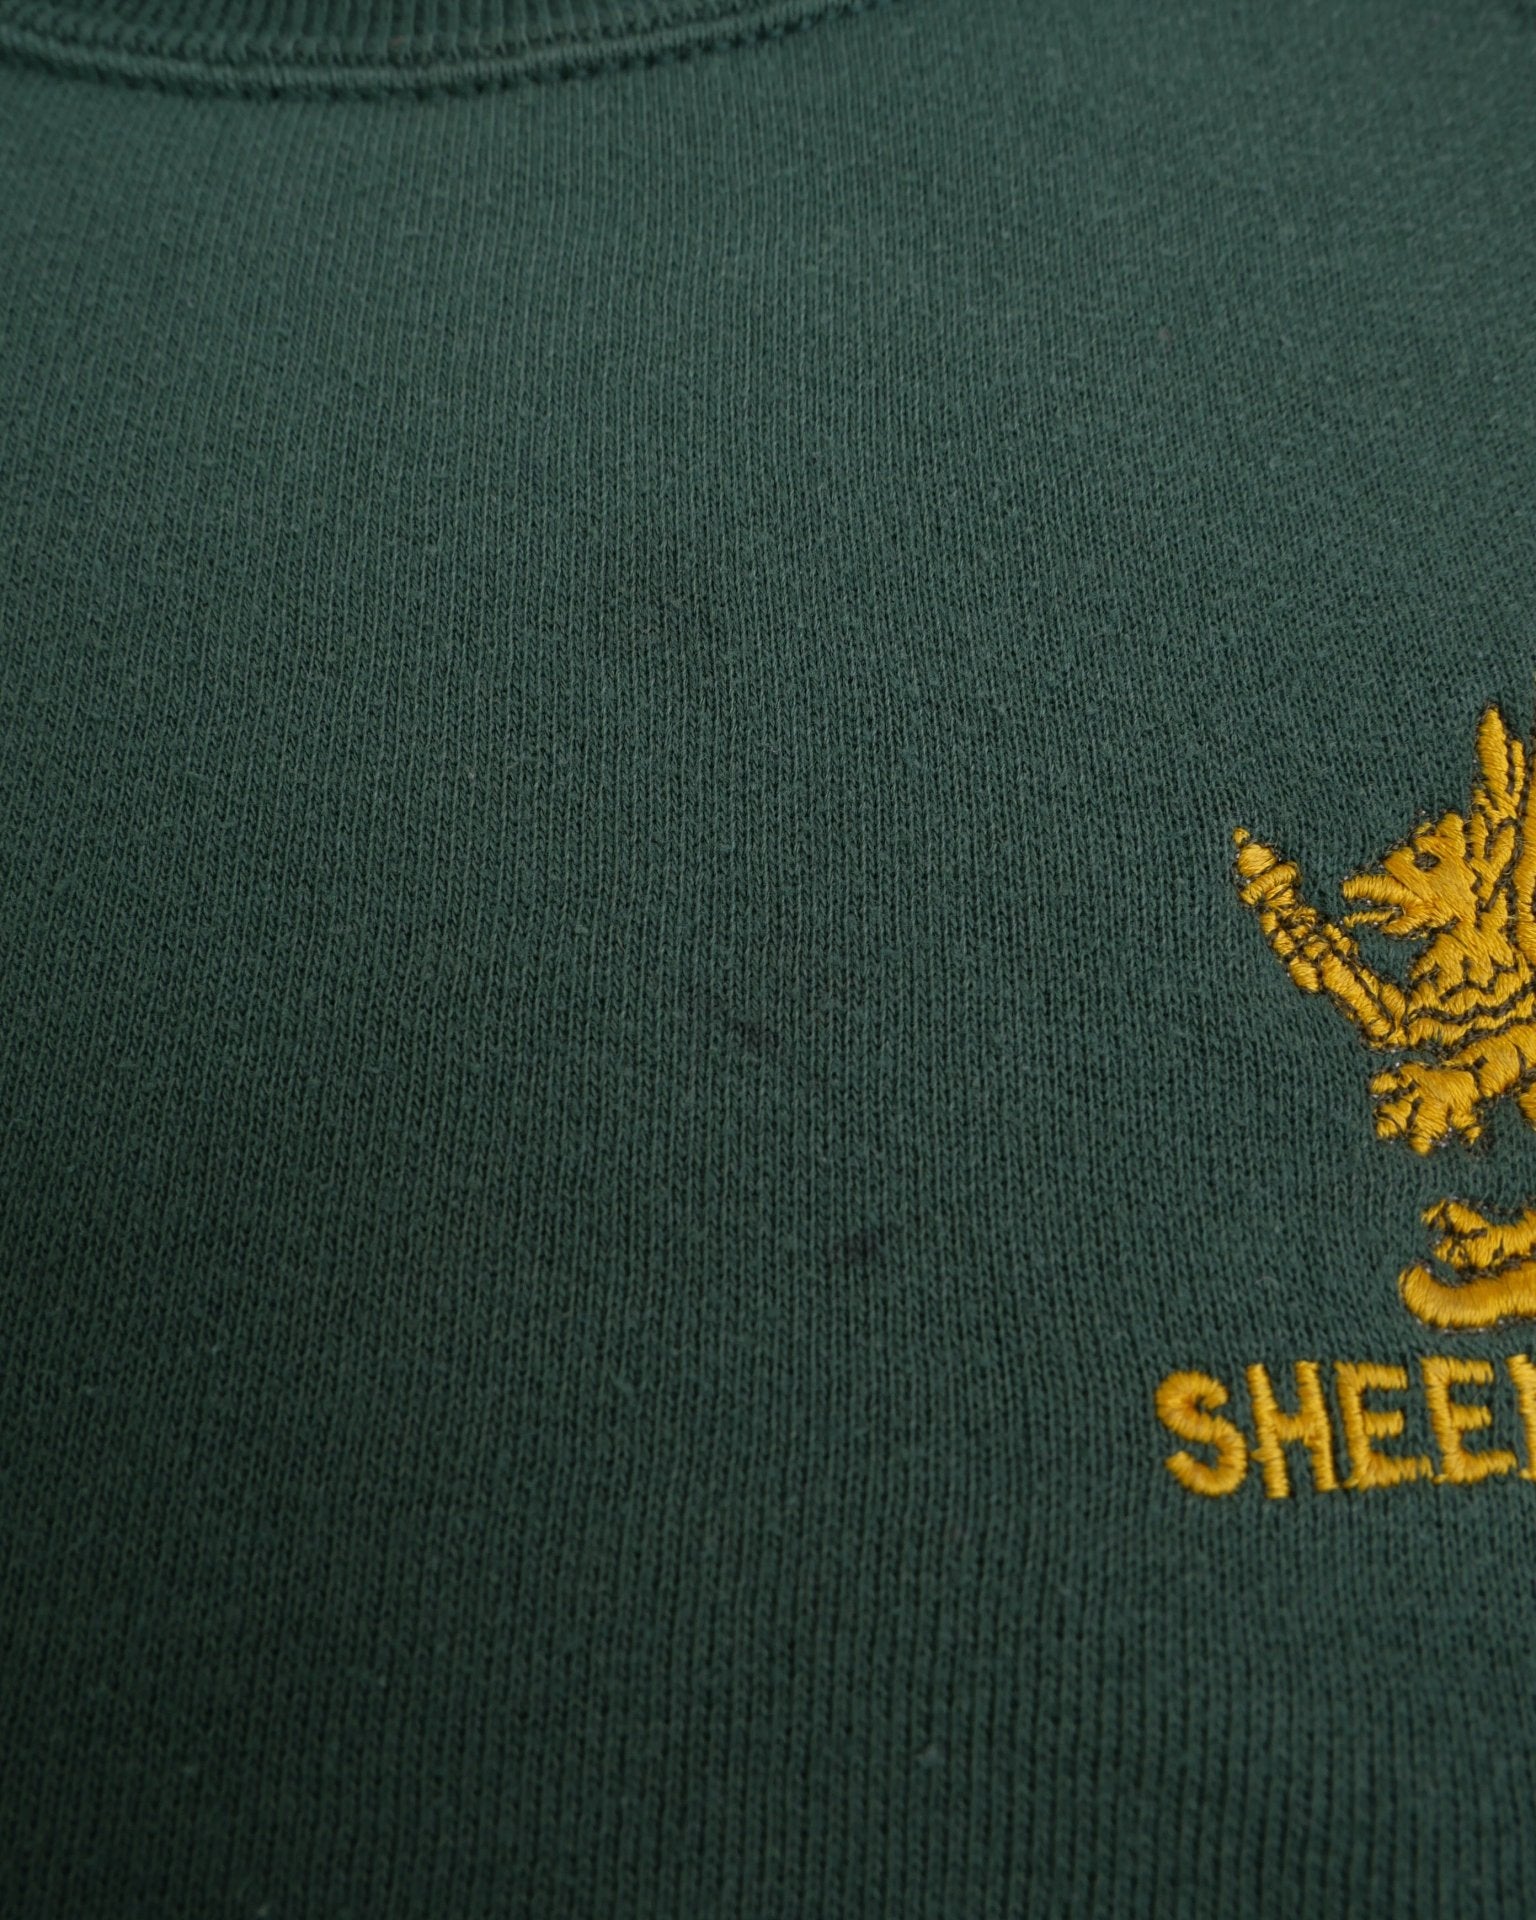 Russell Athletic Sheen Mount embroidered Logo Vintage Sweater - Peeces